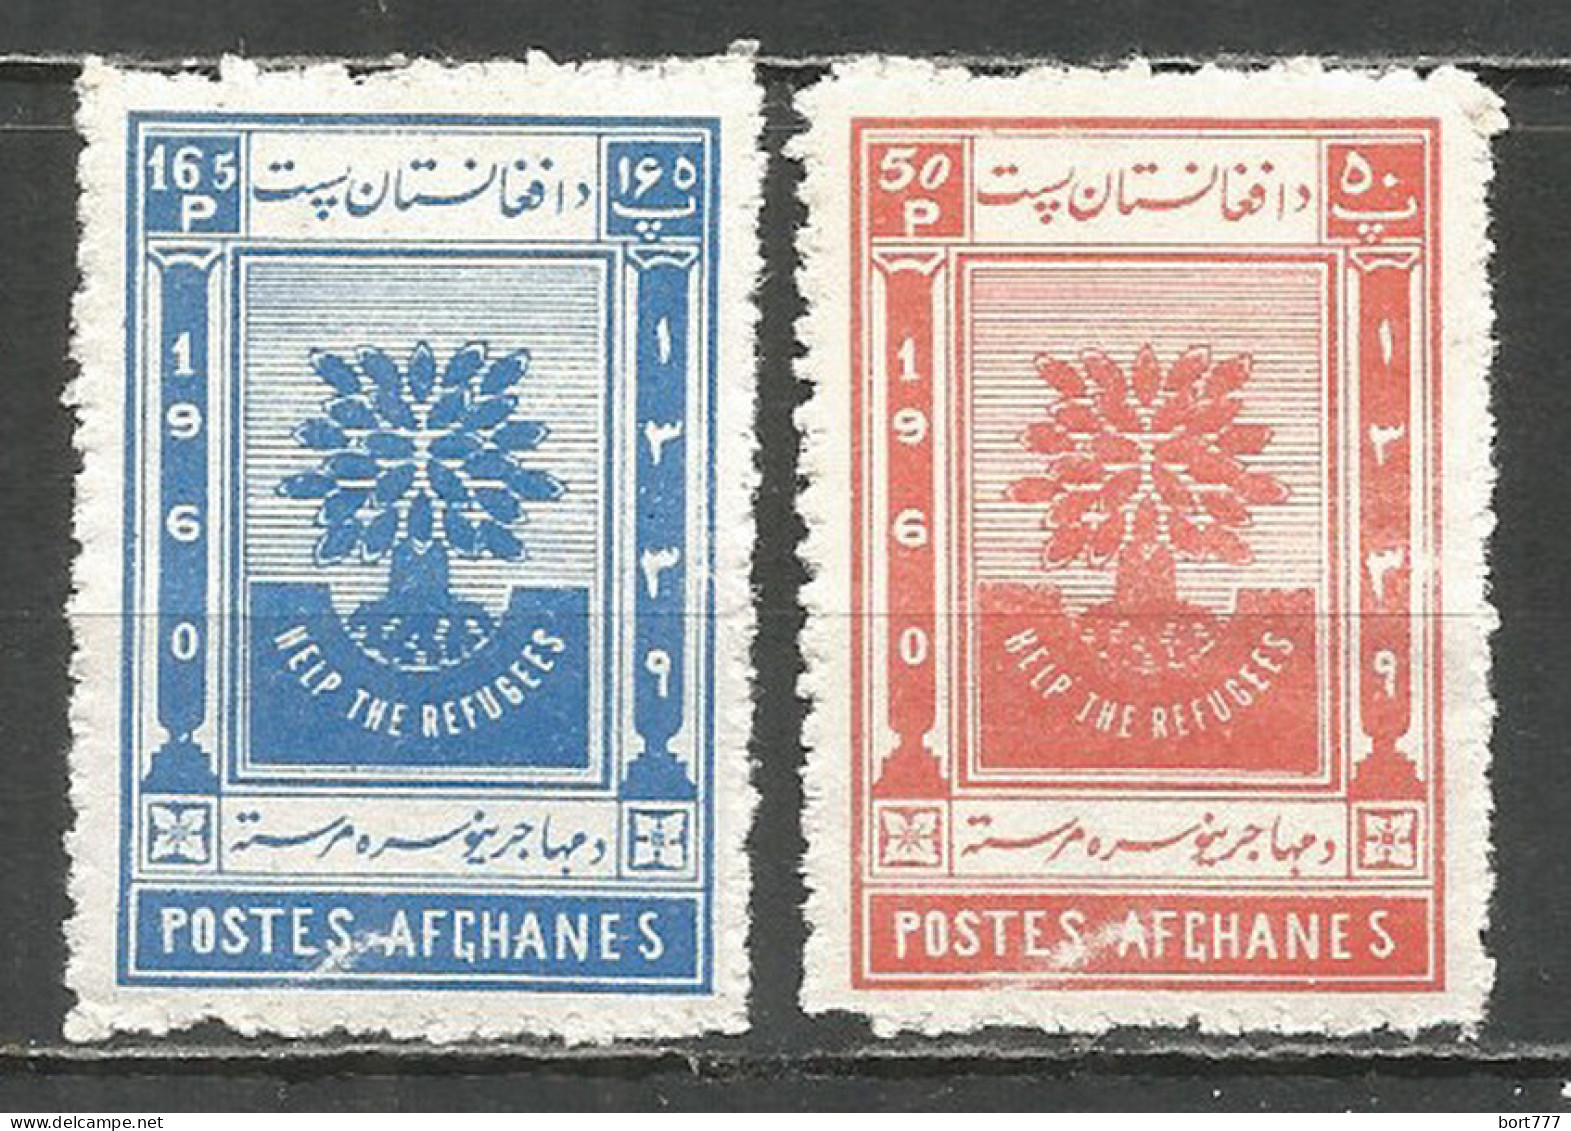 AFGHANISTAN 1960 Year, Mint Stamps MNH (**) - Afganistán